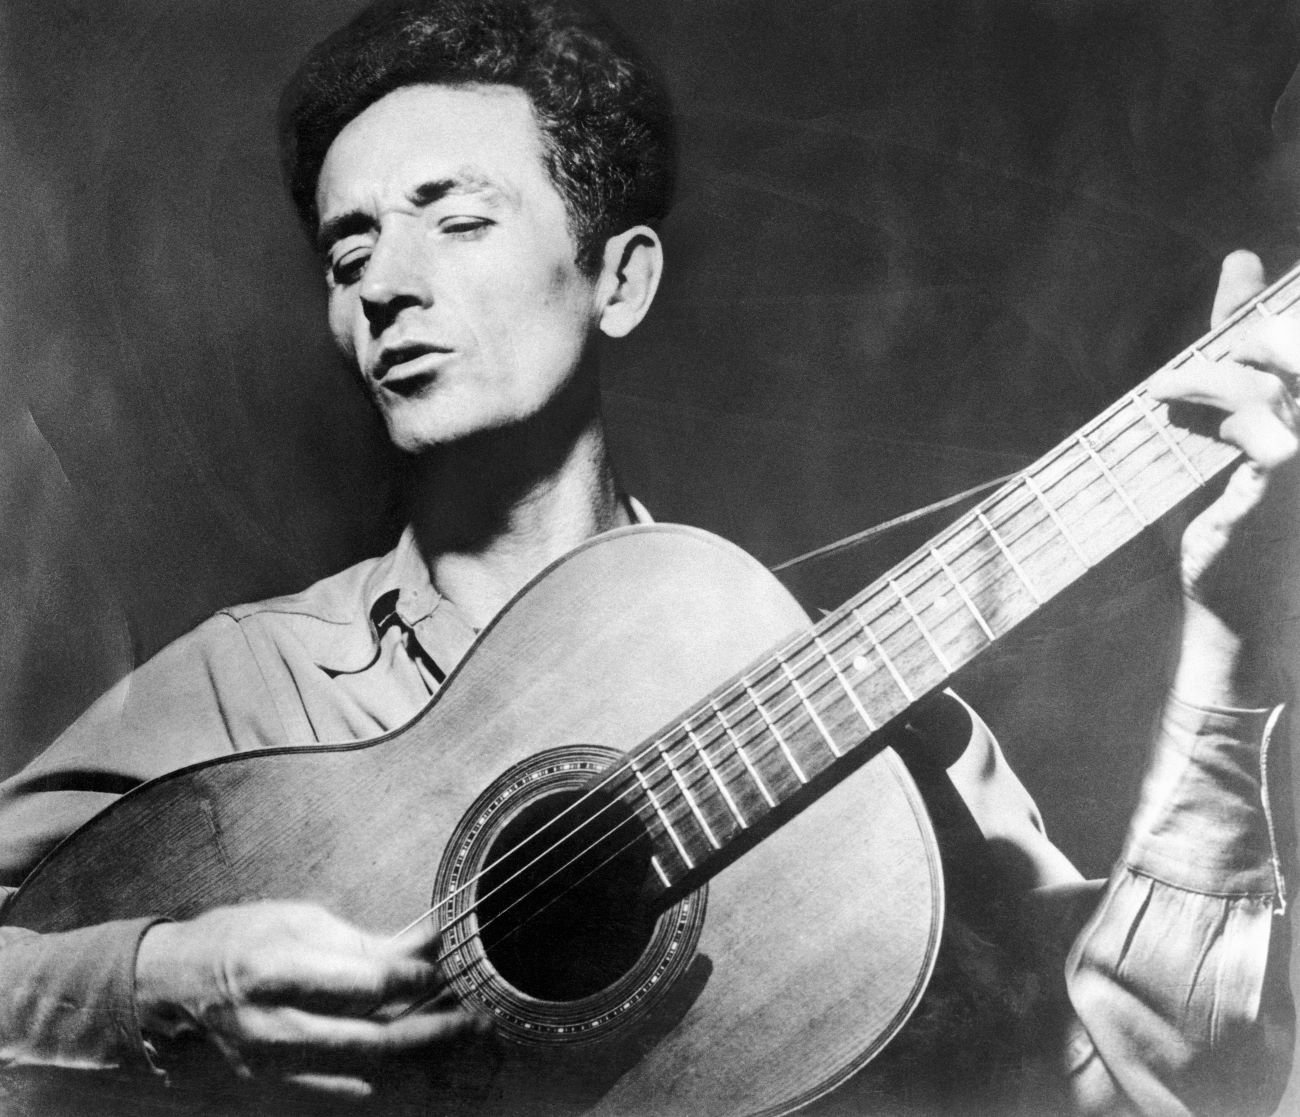 A black and white picture of Woody Guthrie playing guitar.